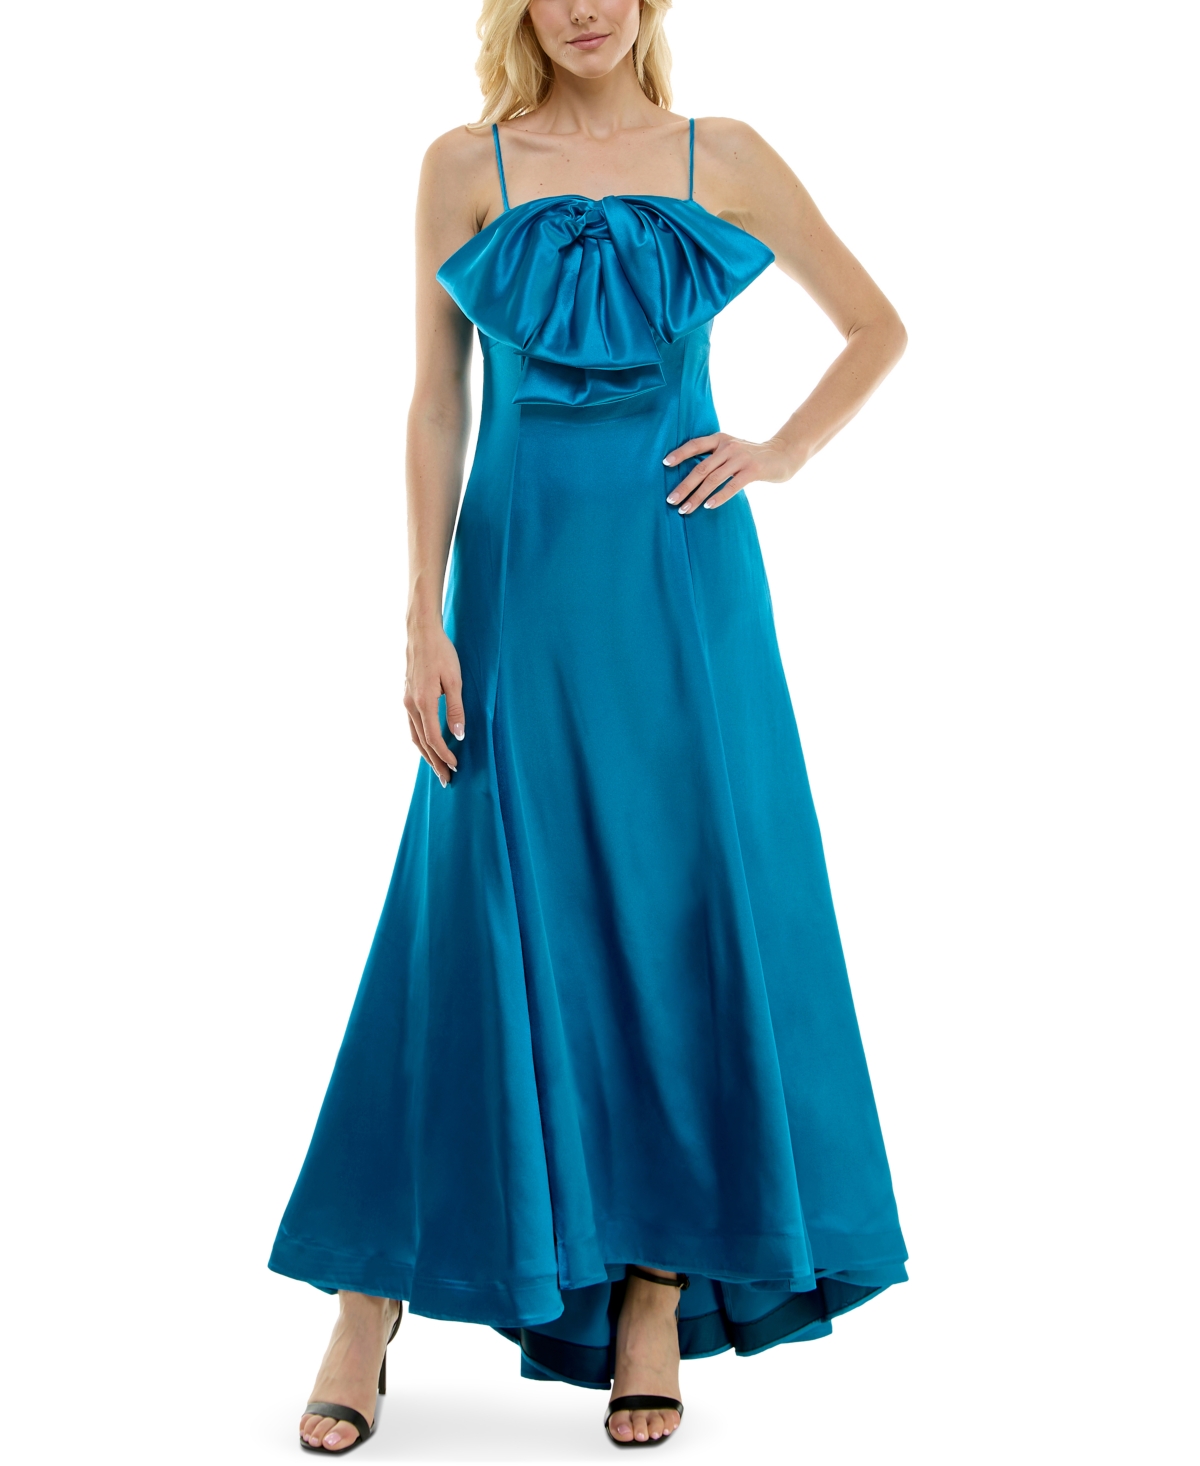 Women's Exaggerated-Bow Satin-Stretch Ball Gown - Dazzling Ocean